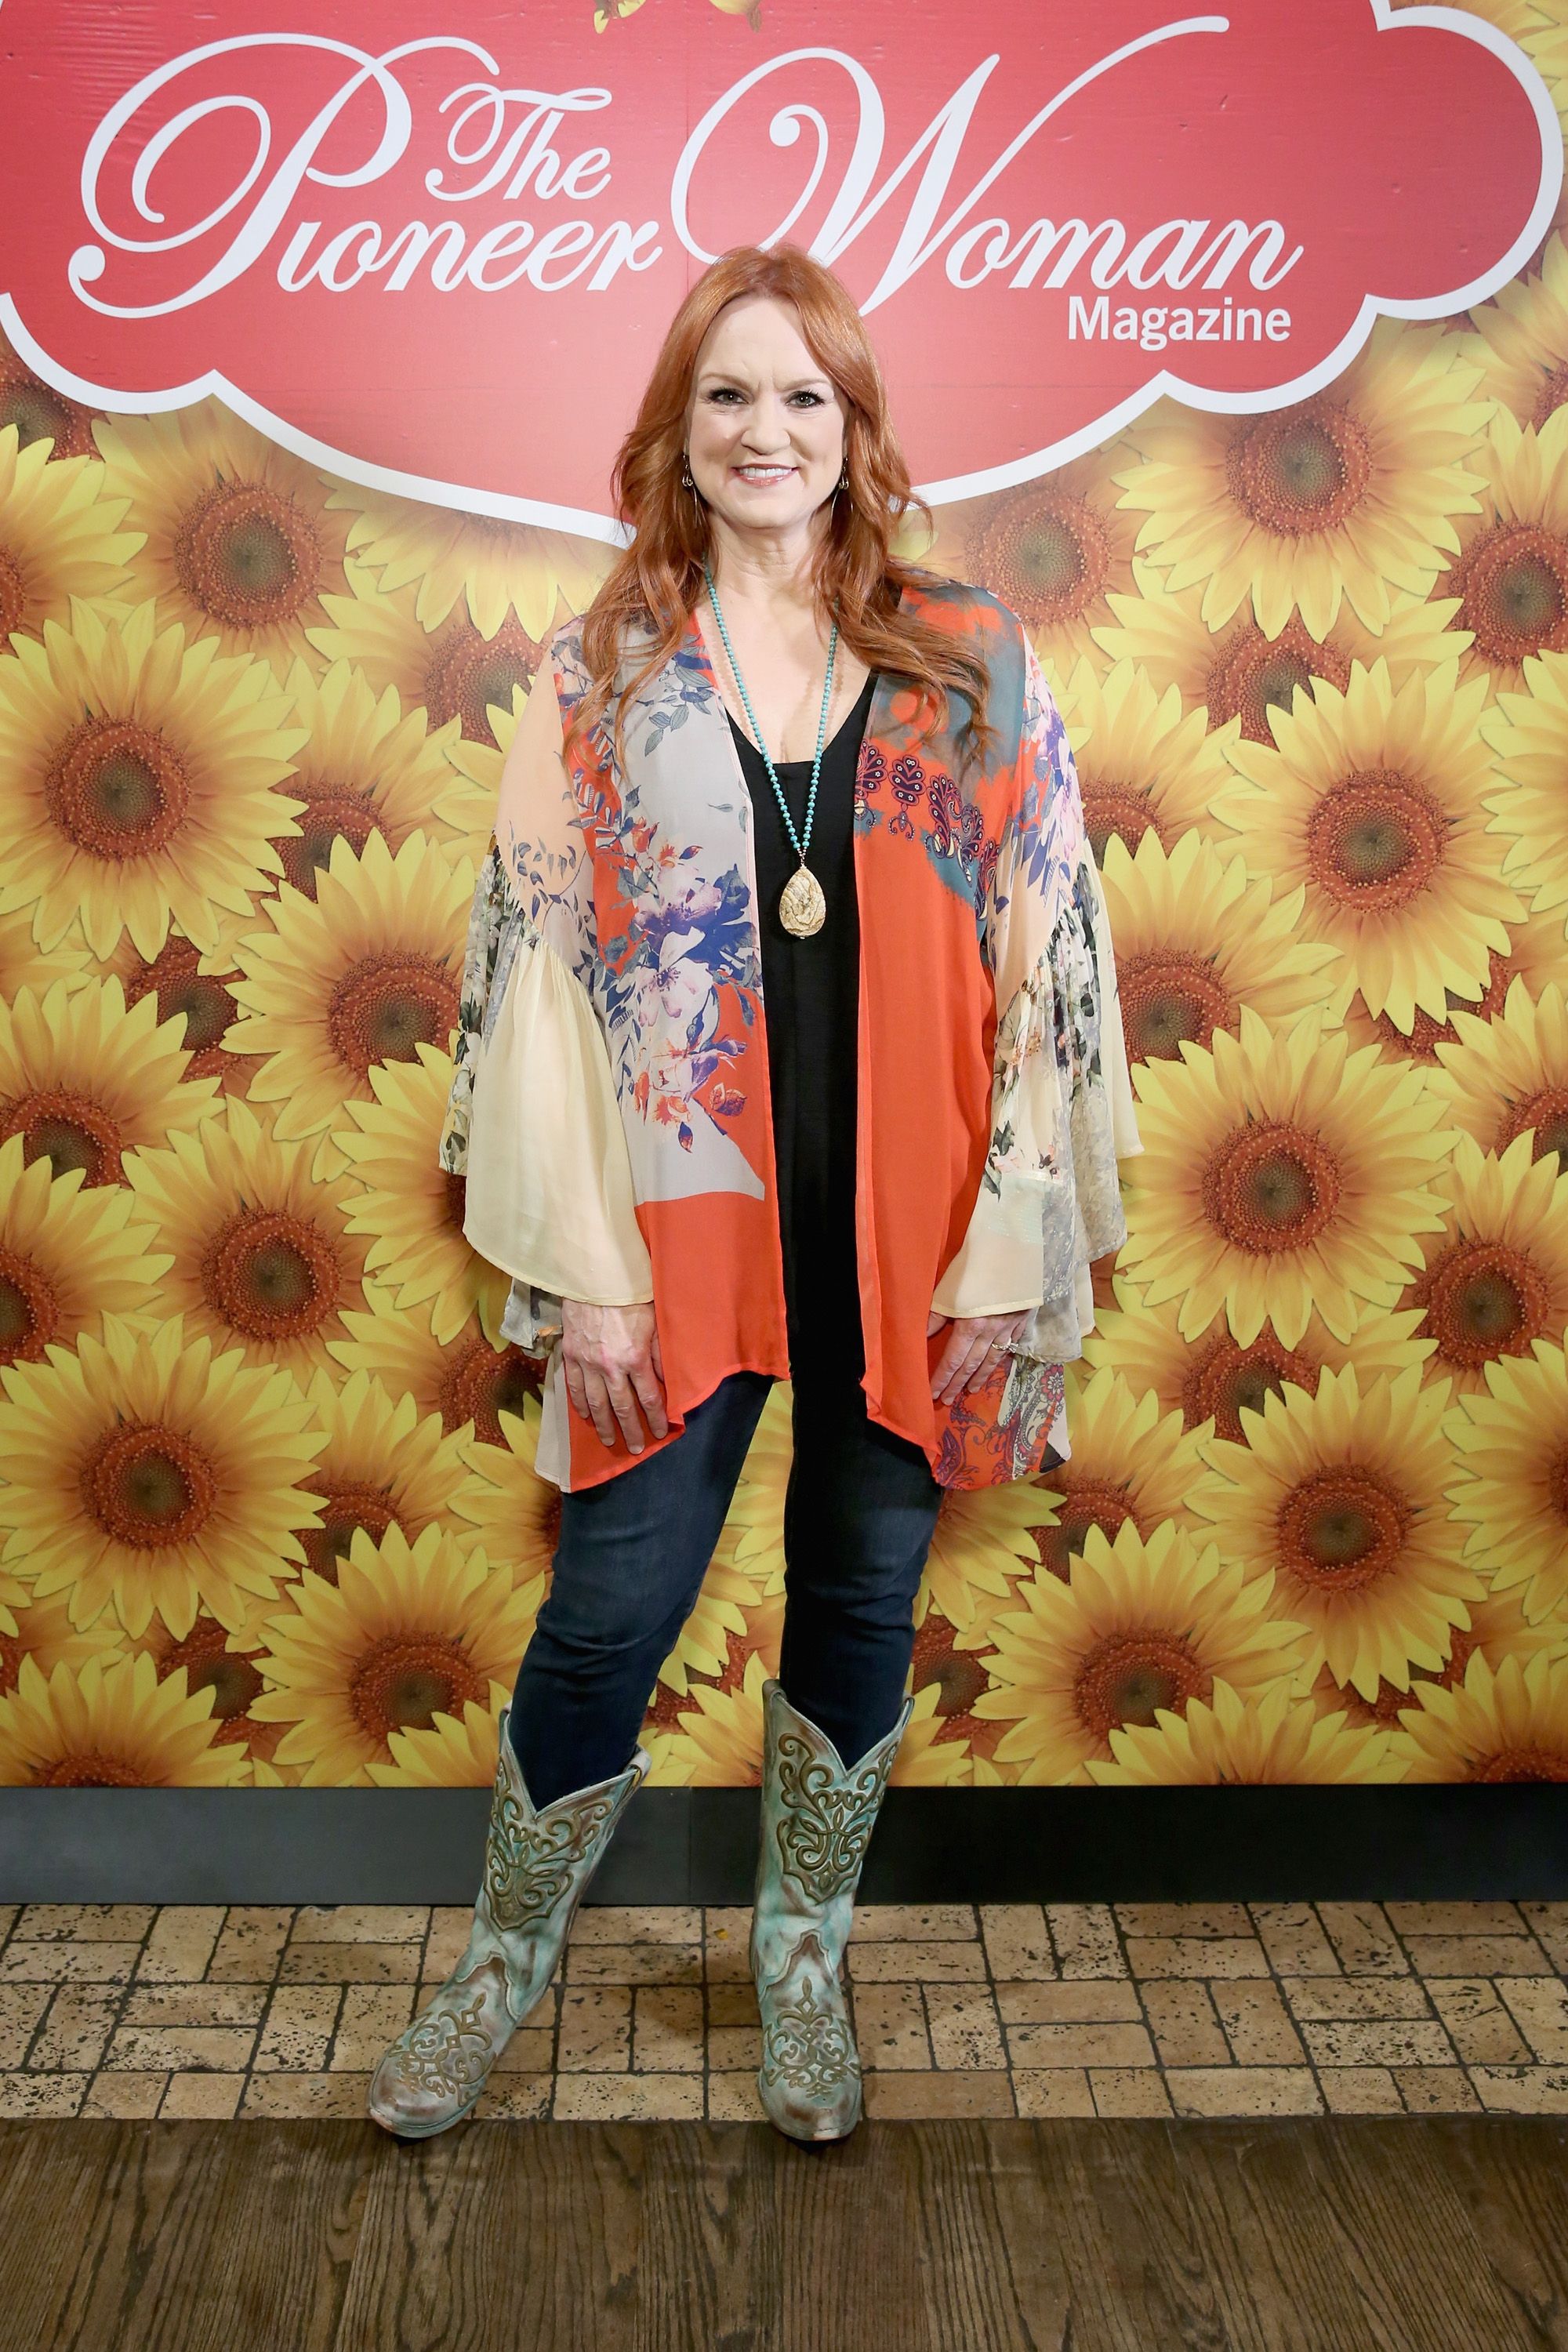 Ree Drummond at "The Pioneer Woman Magazine Celebration with Ree Drummond" on June 6, 2017, in New York City | Photo: Getty Images